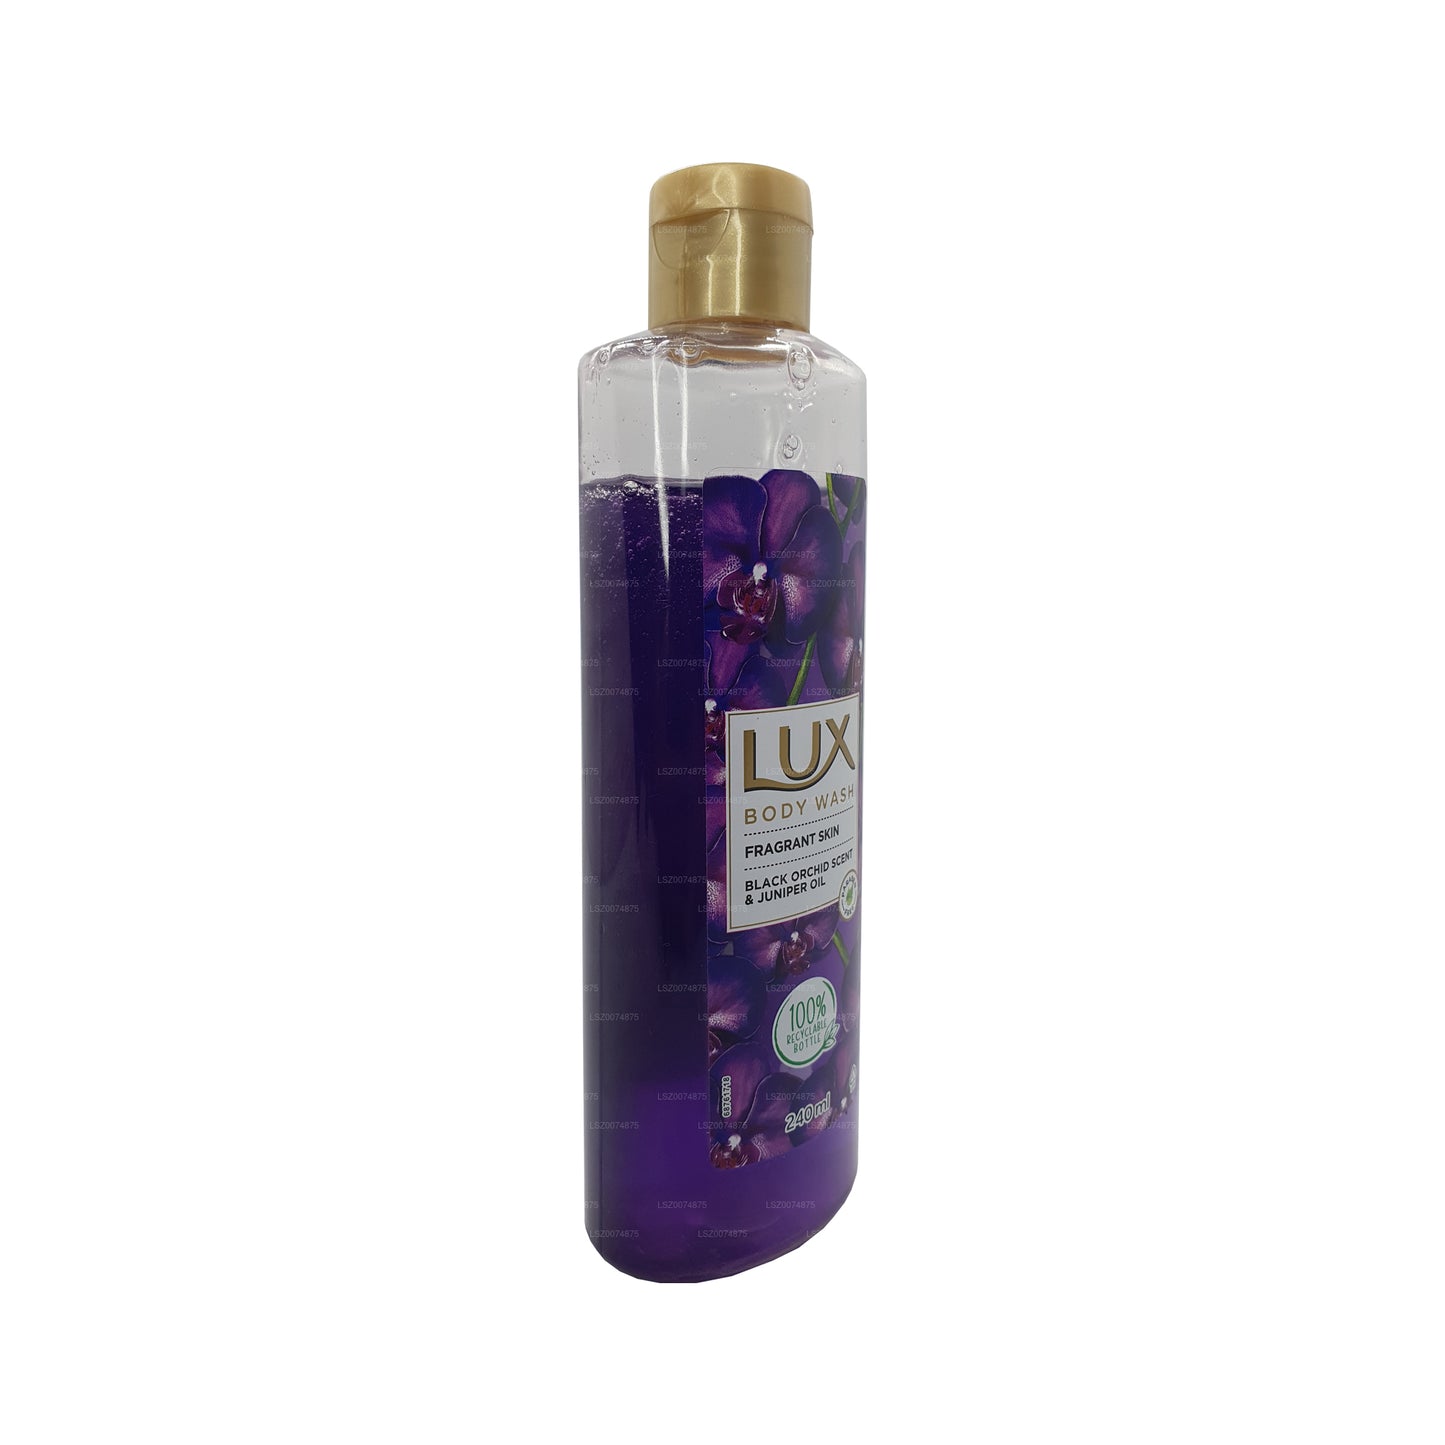 LUX Magical Spell Body Wash (240ml)